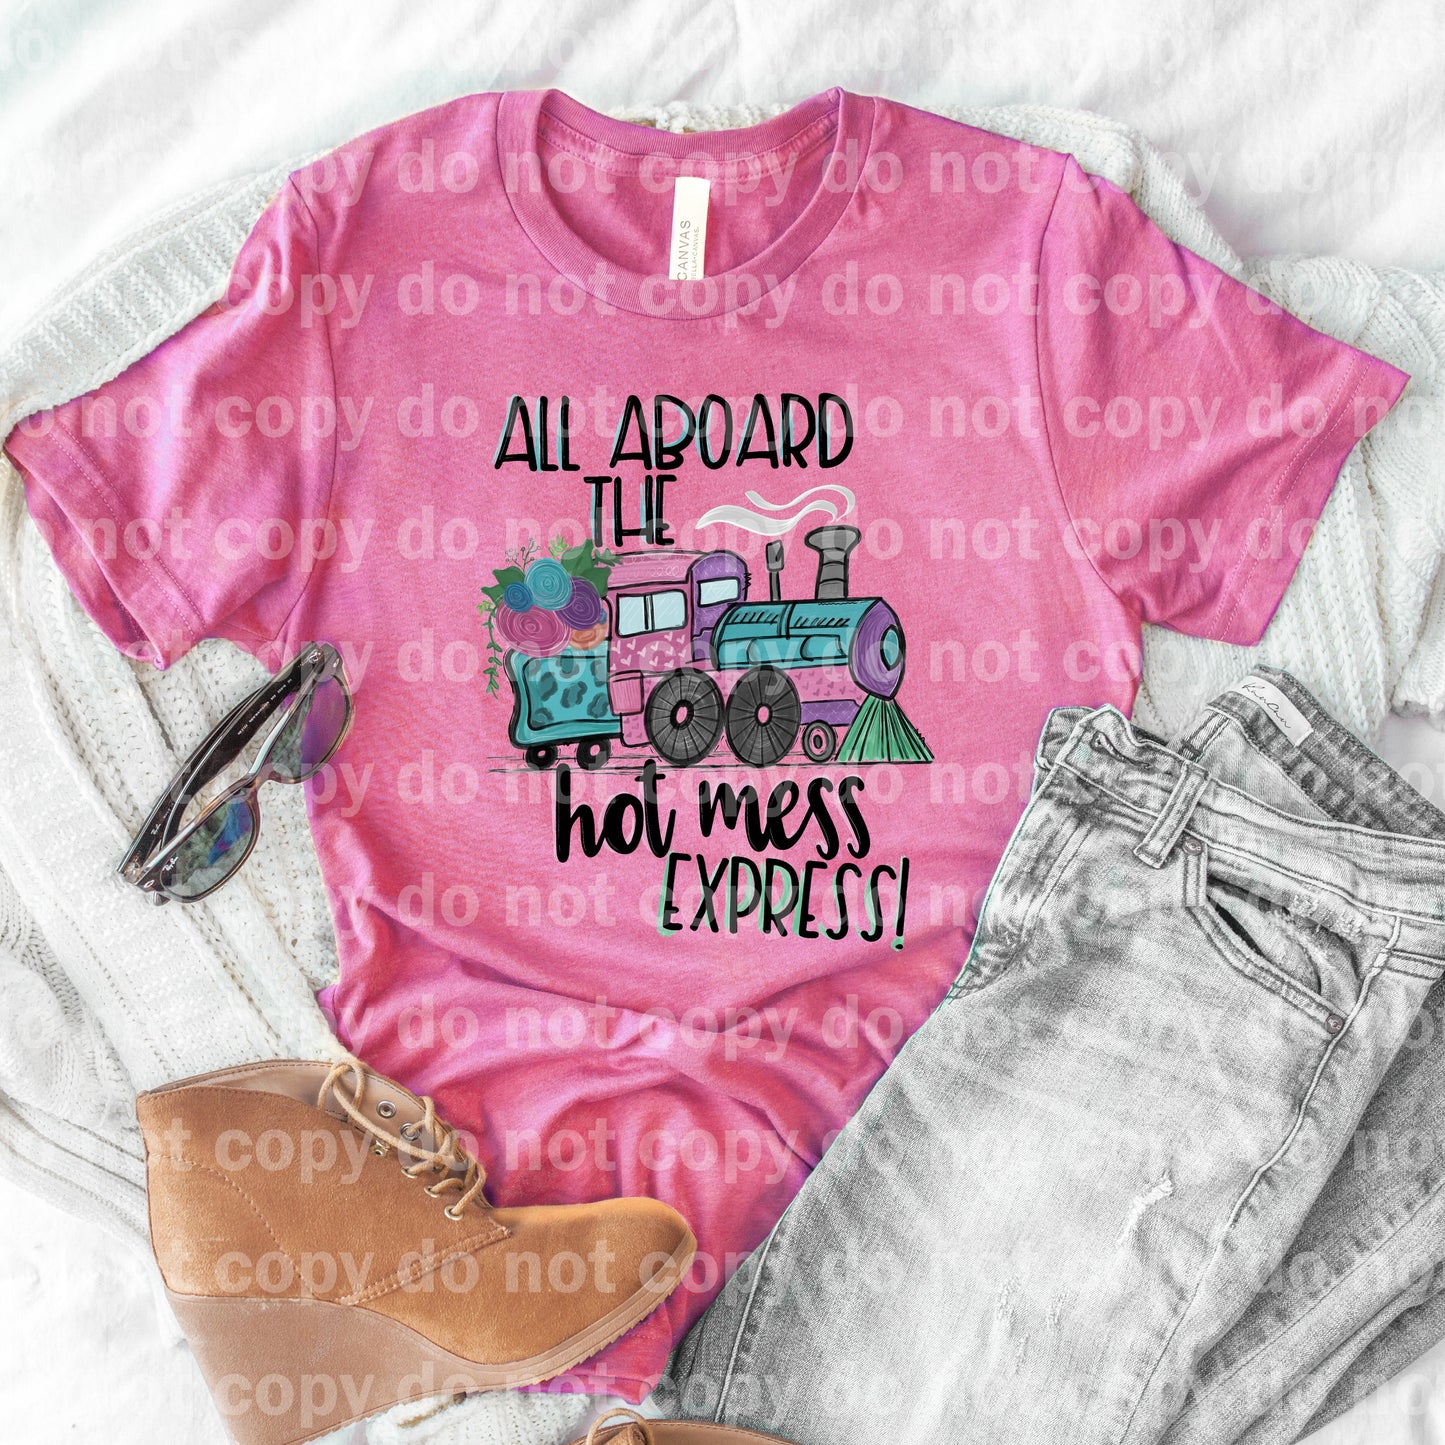 All Aboard The Hot Mess Express Dream Print or Sublimation Print